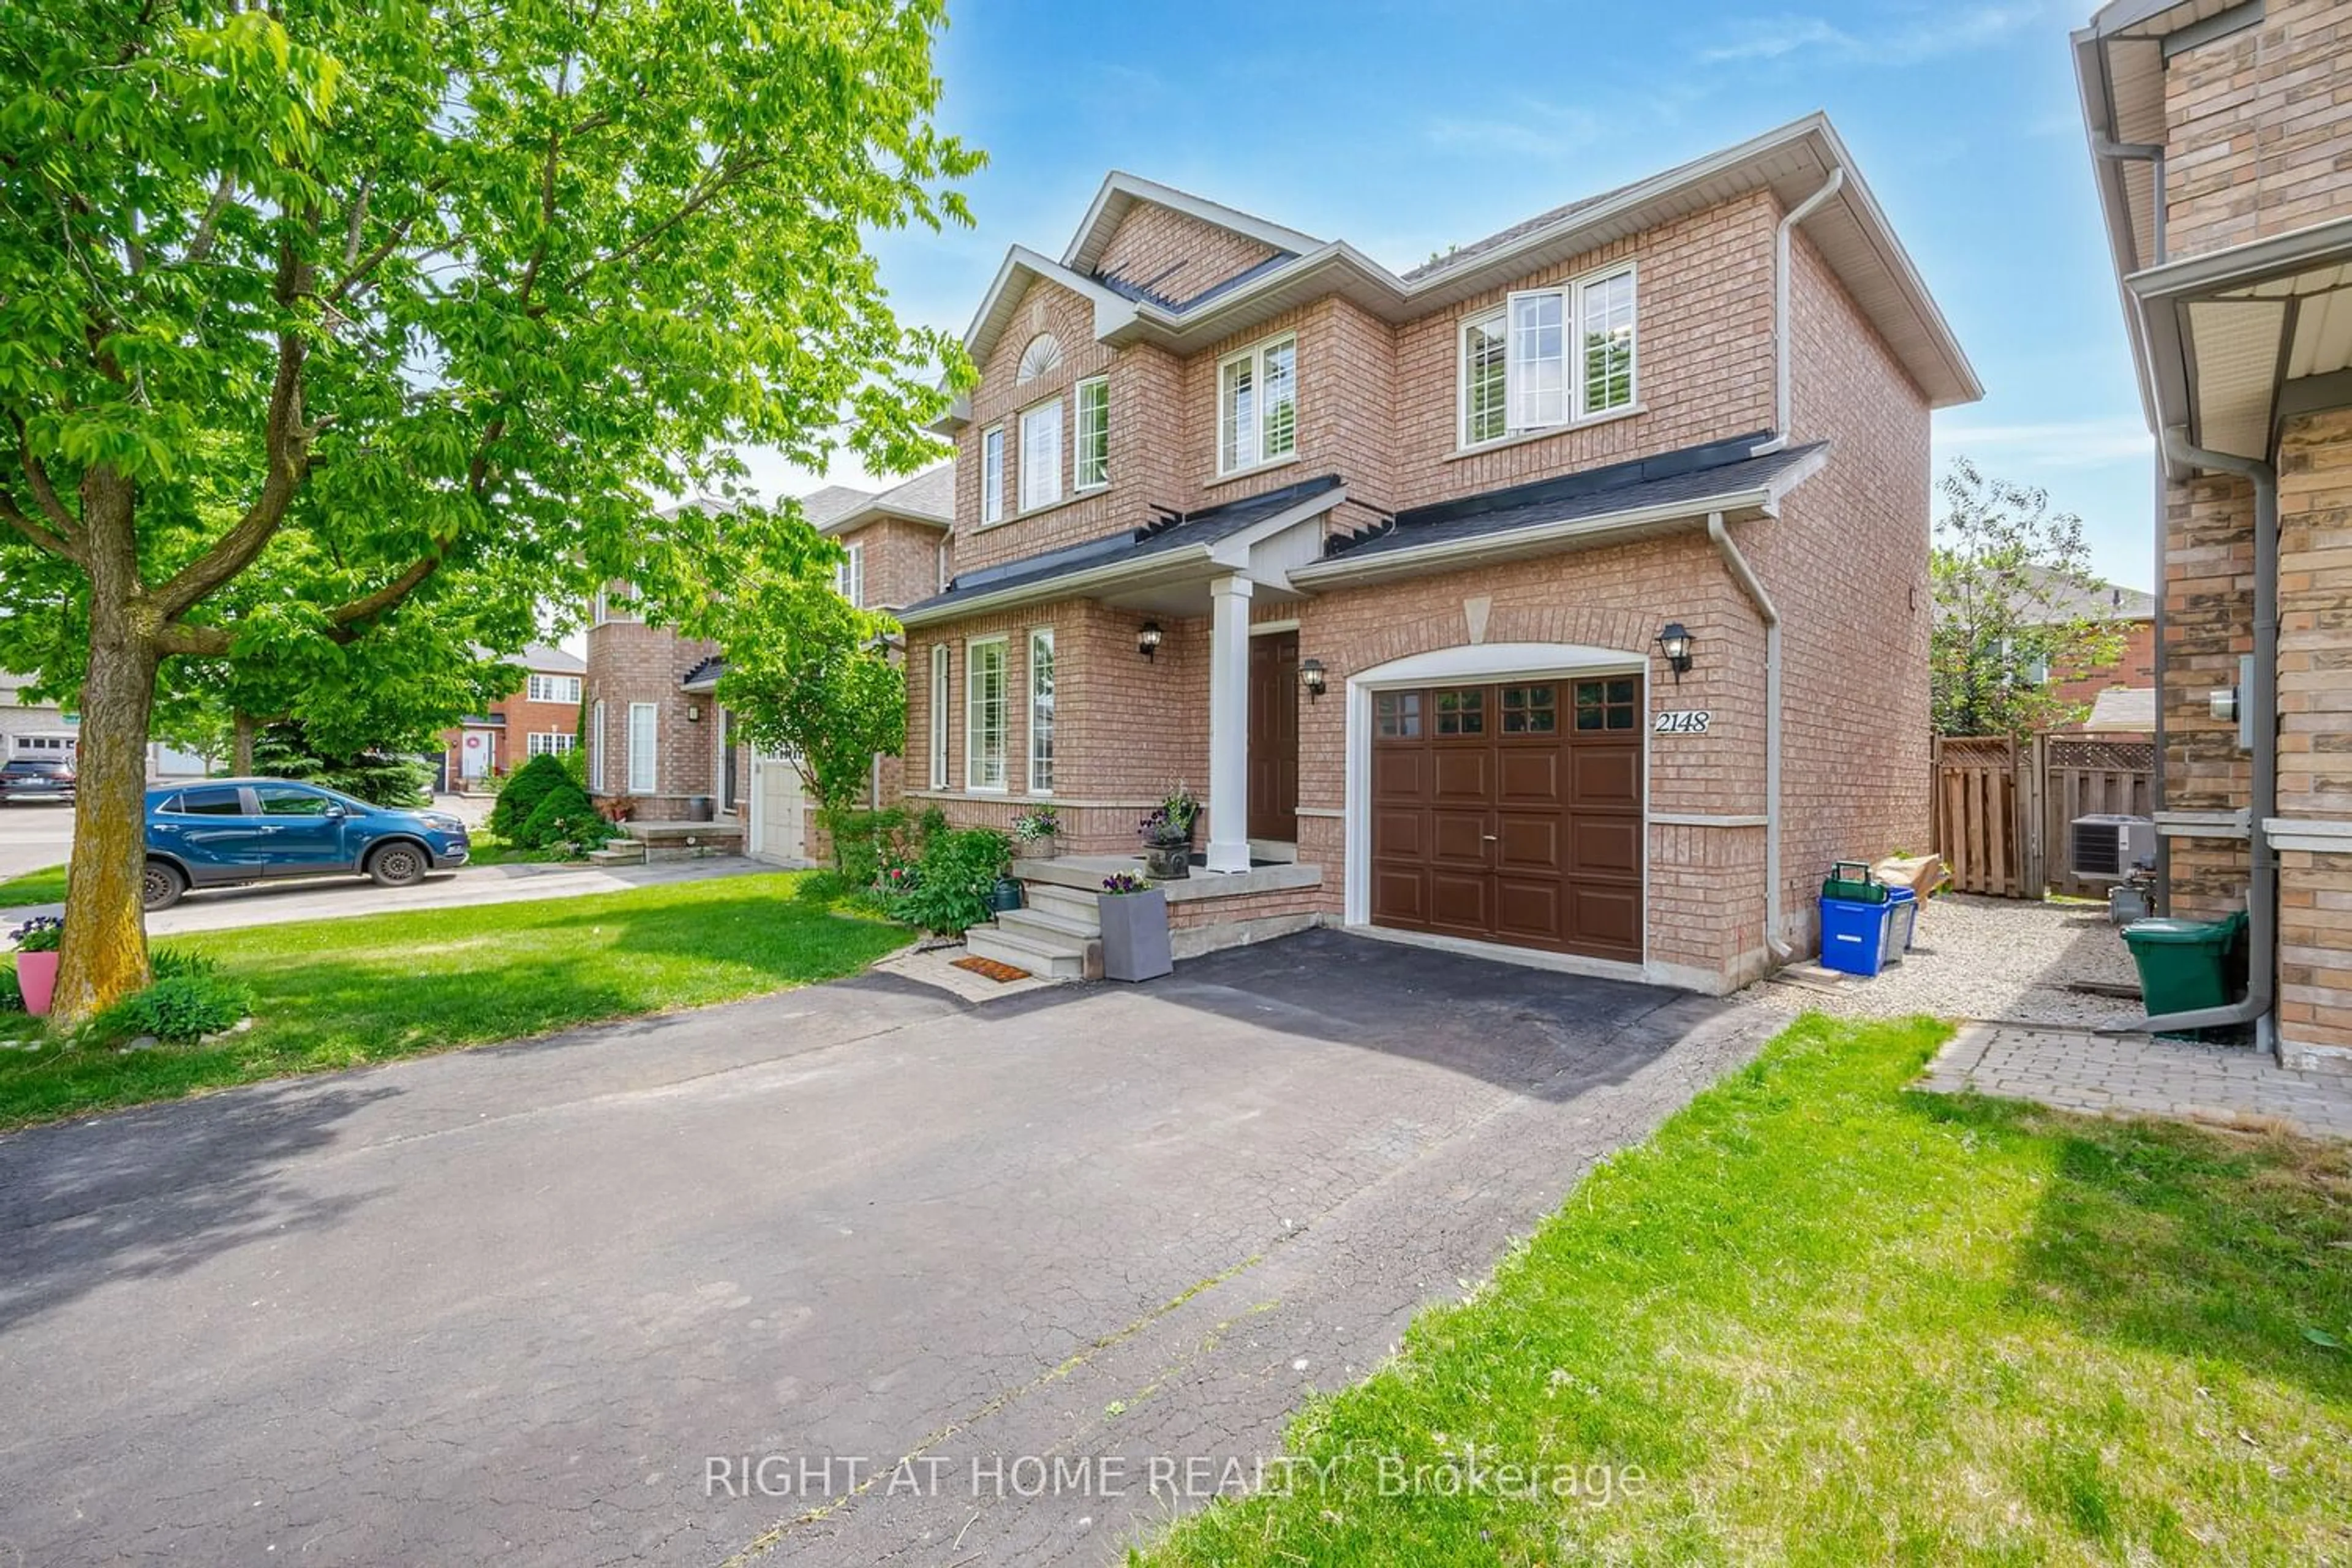 Home with brick exterior material for 2148 Village Squire Lane, Oakville Ontario L6M 3W8